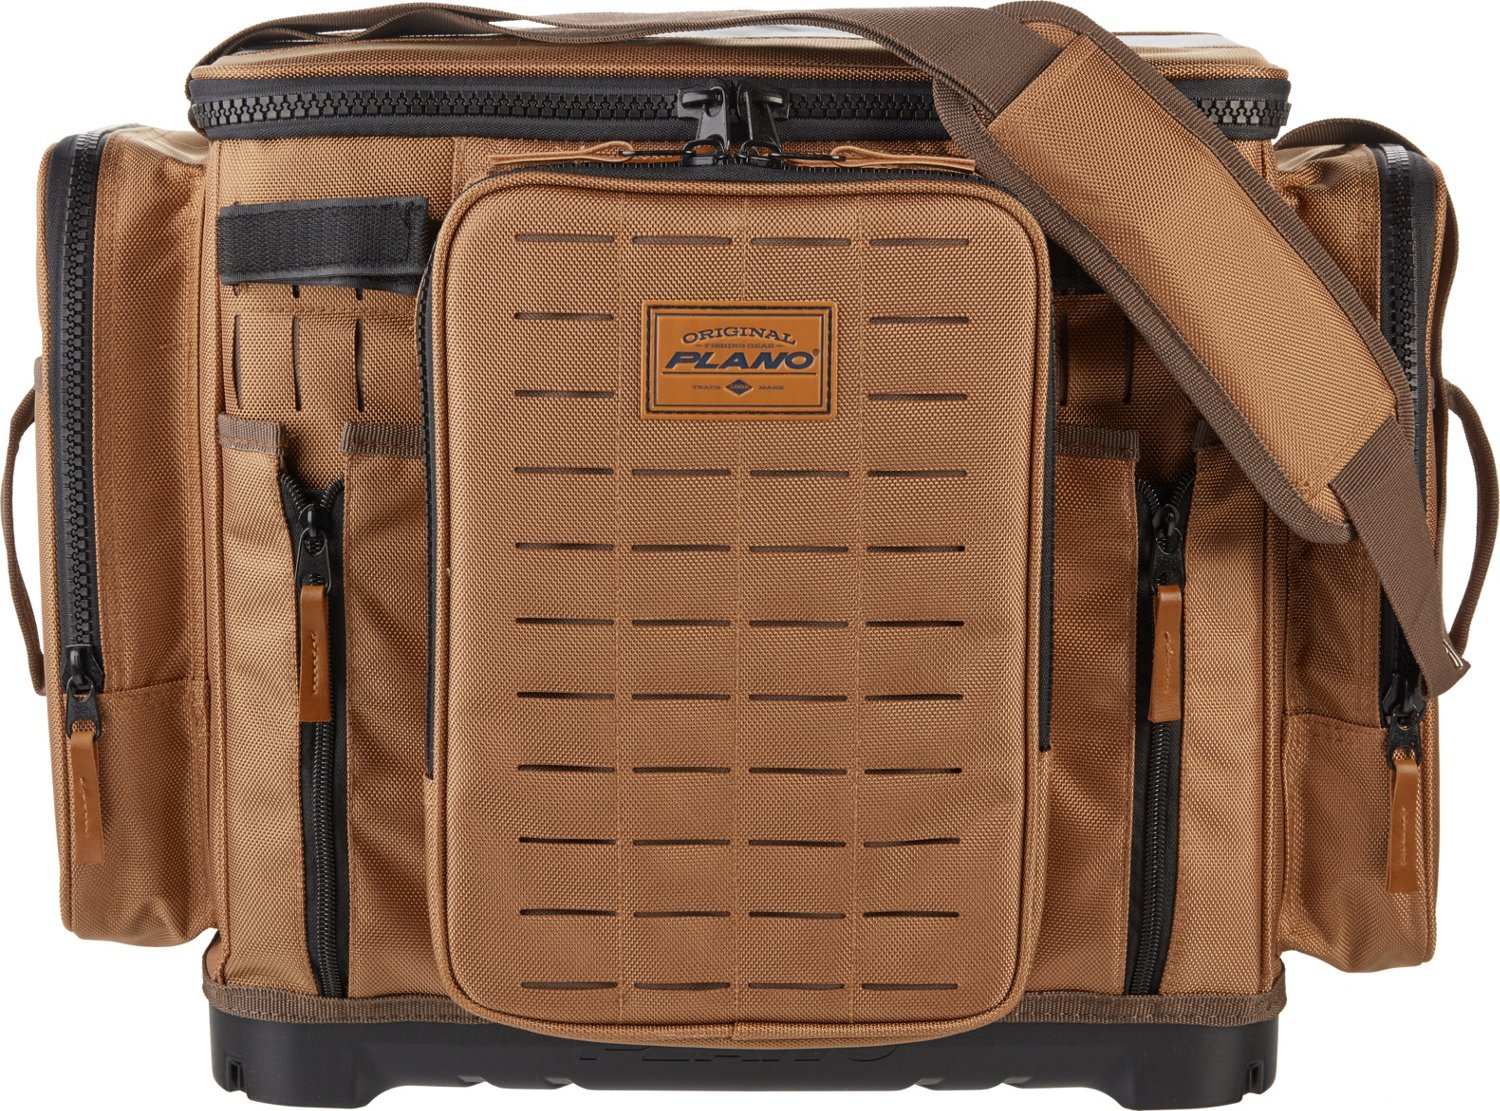 Plano Guide Series 3700 XL Tackle Bag